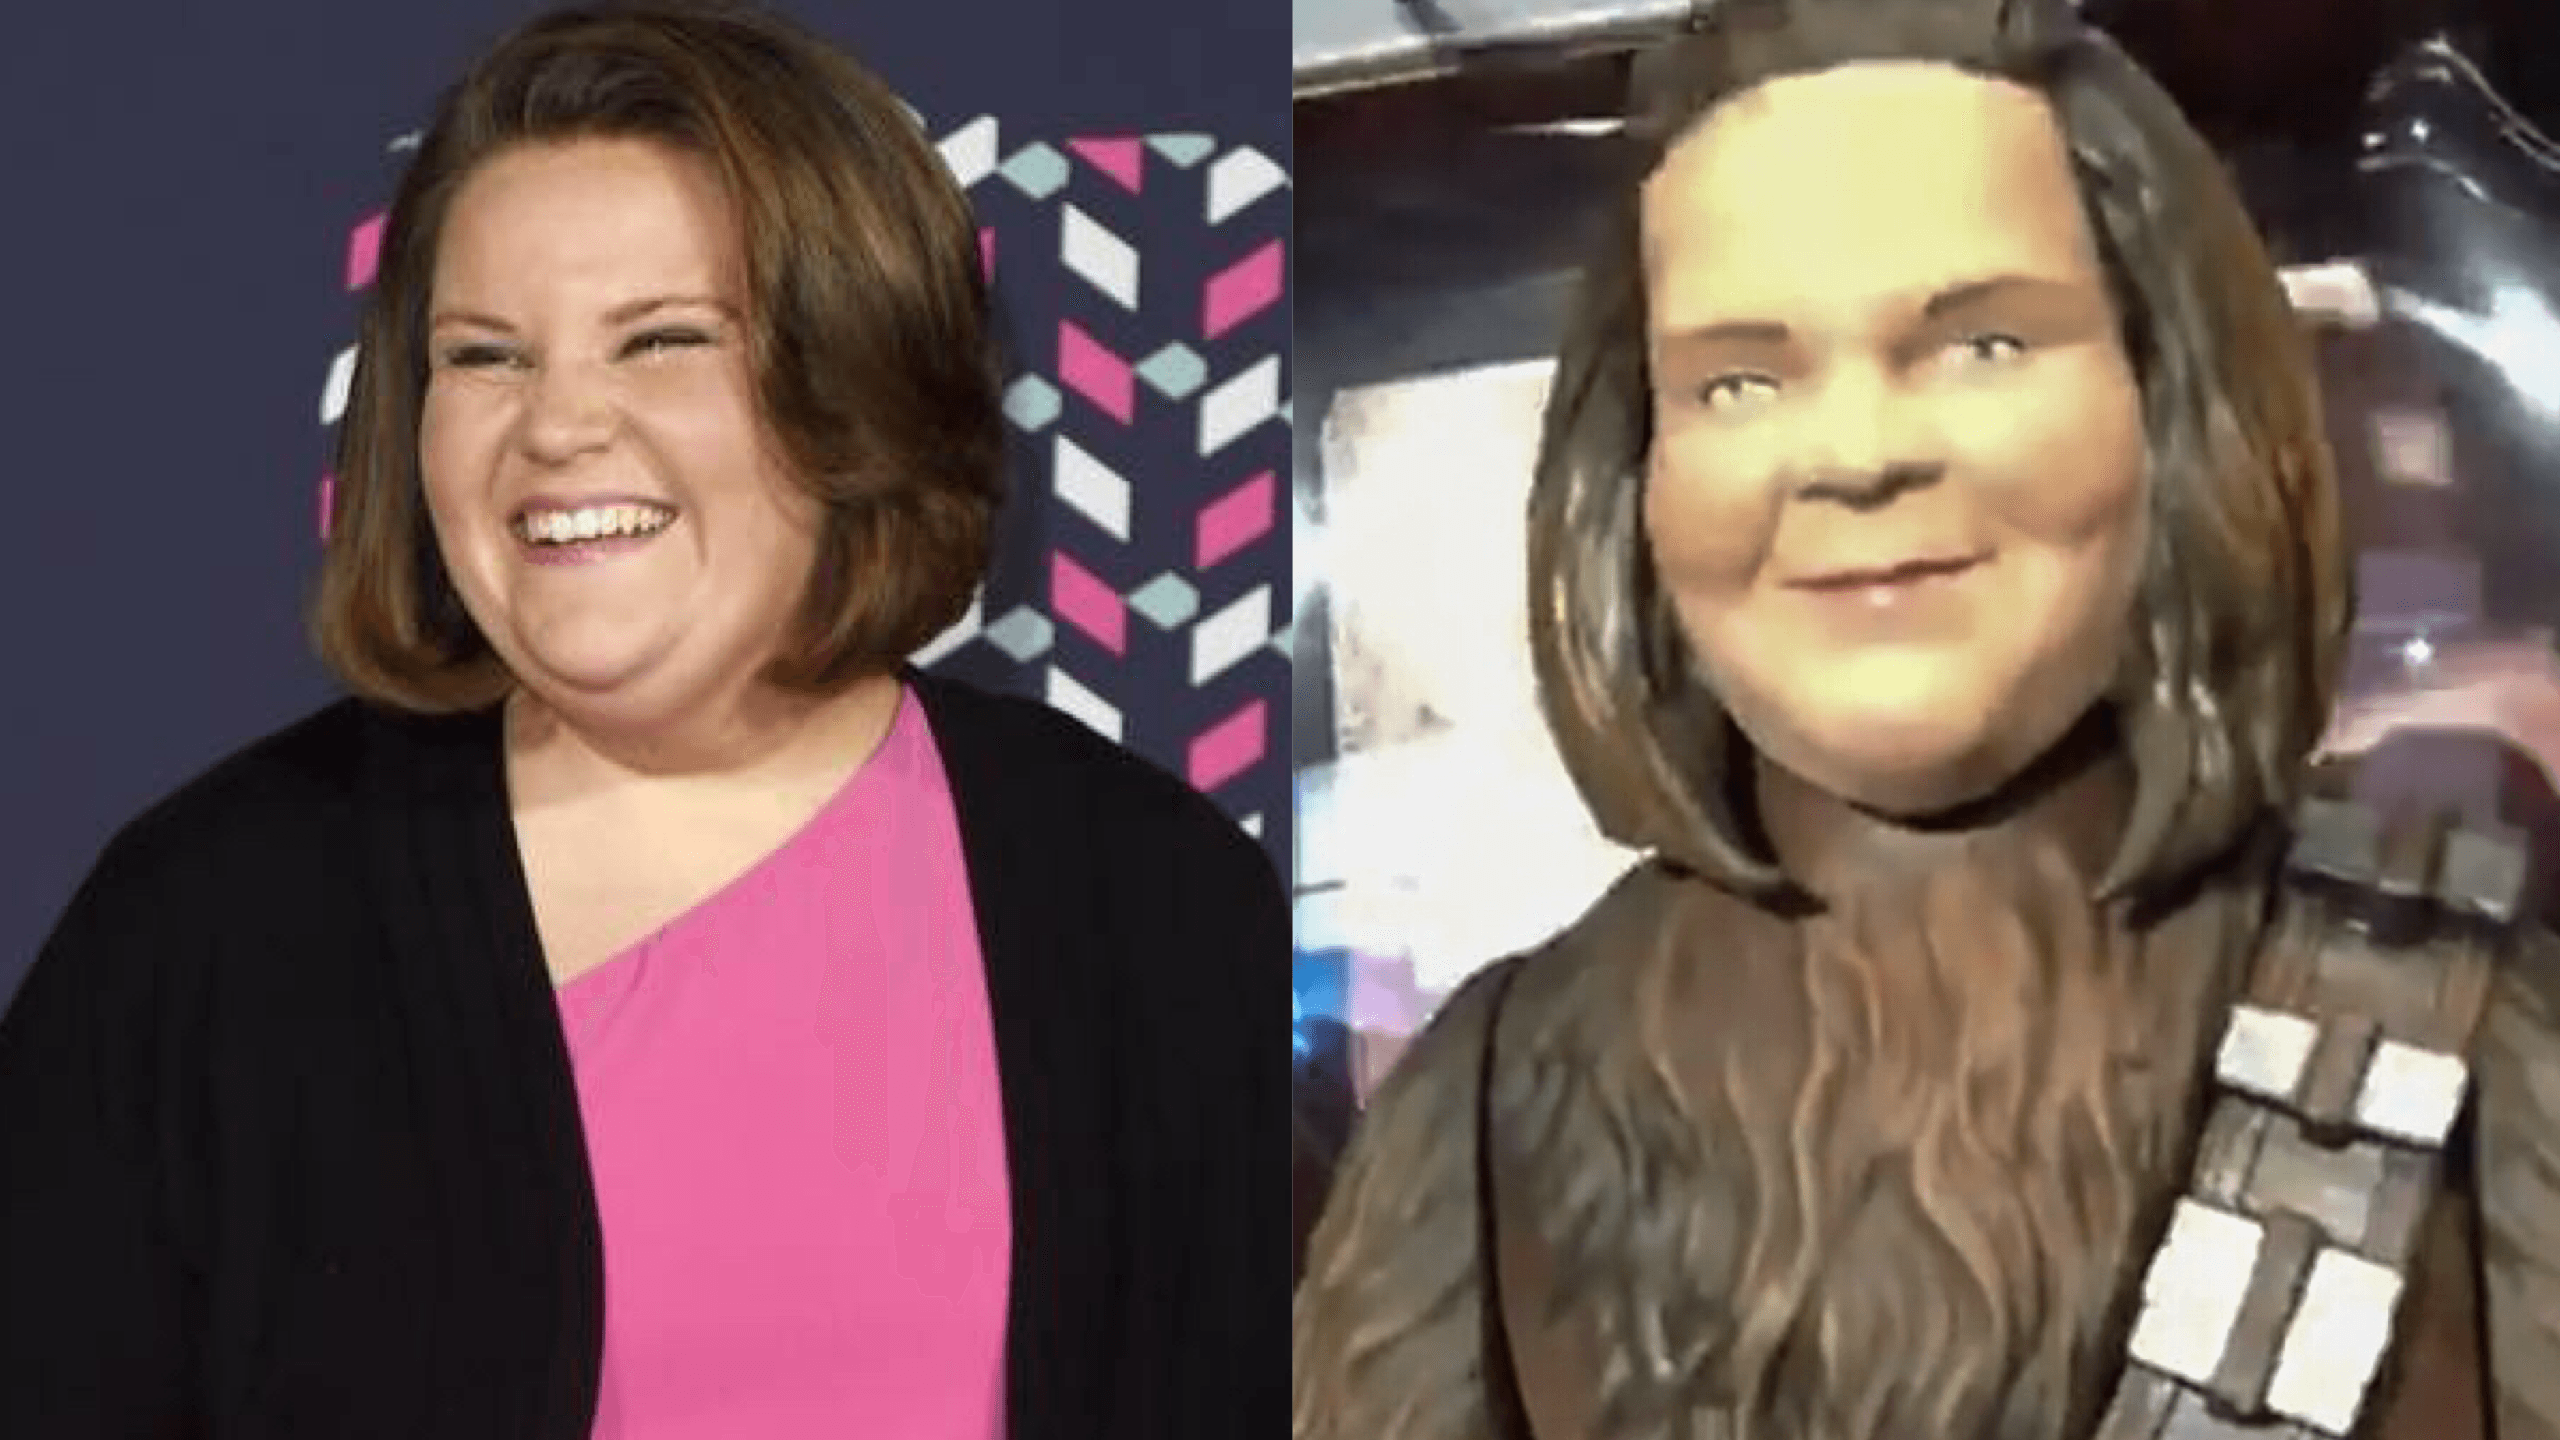 LOOK: ‘Chewbacca Mom’ gets own action figure